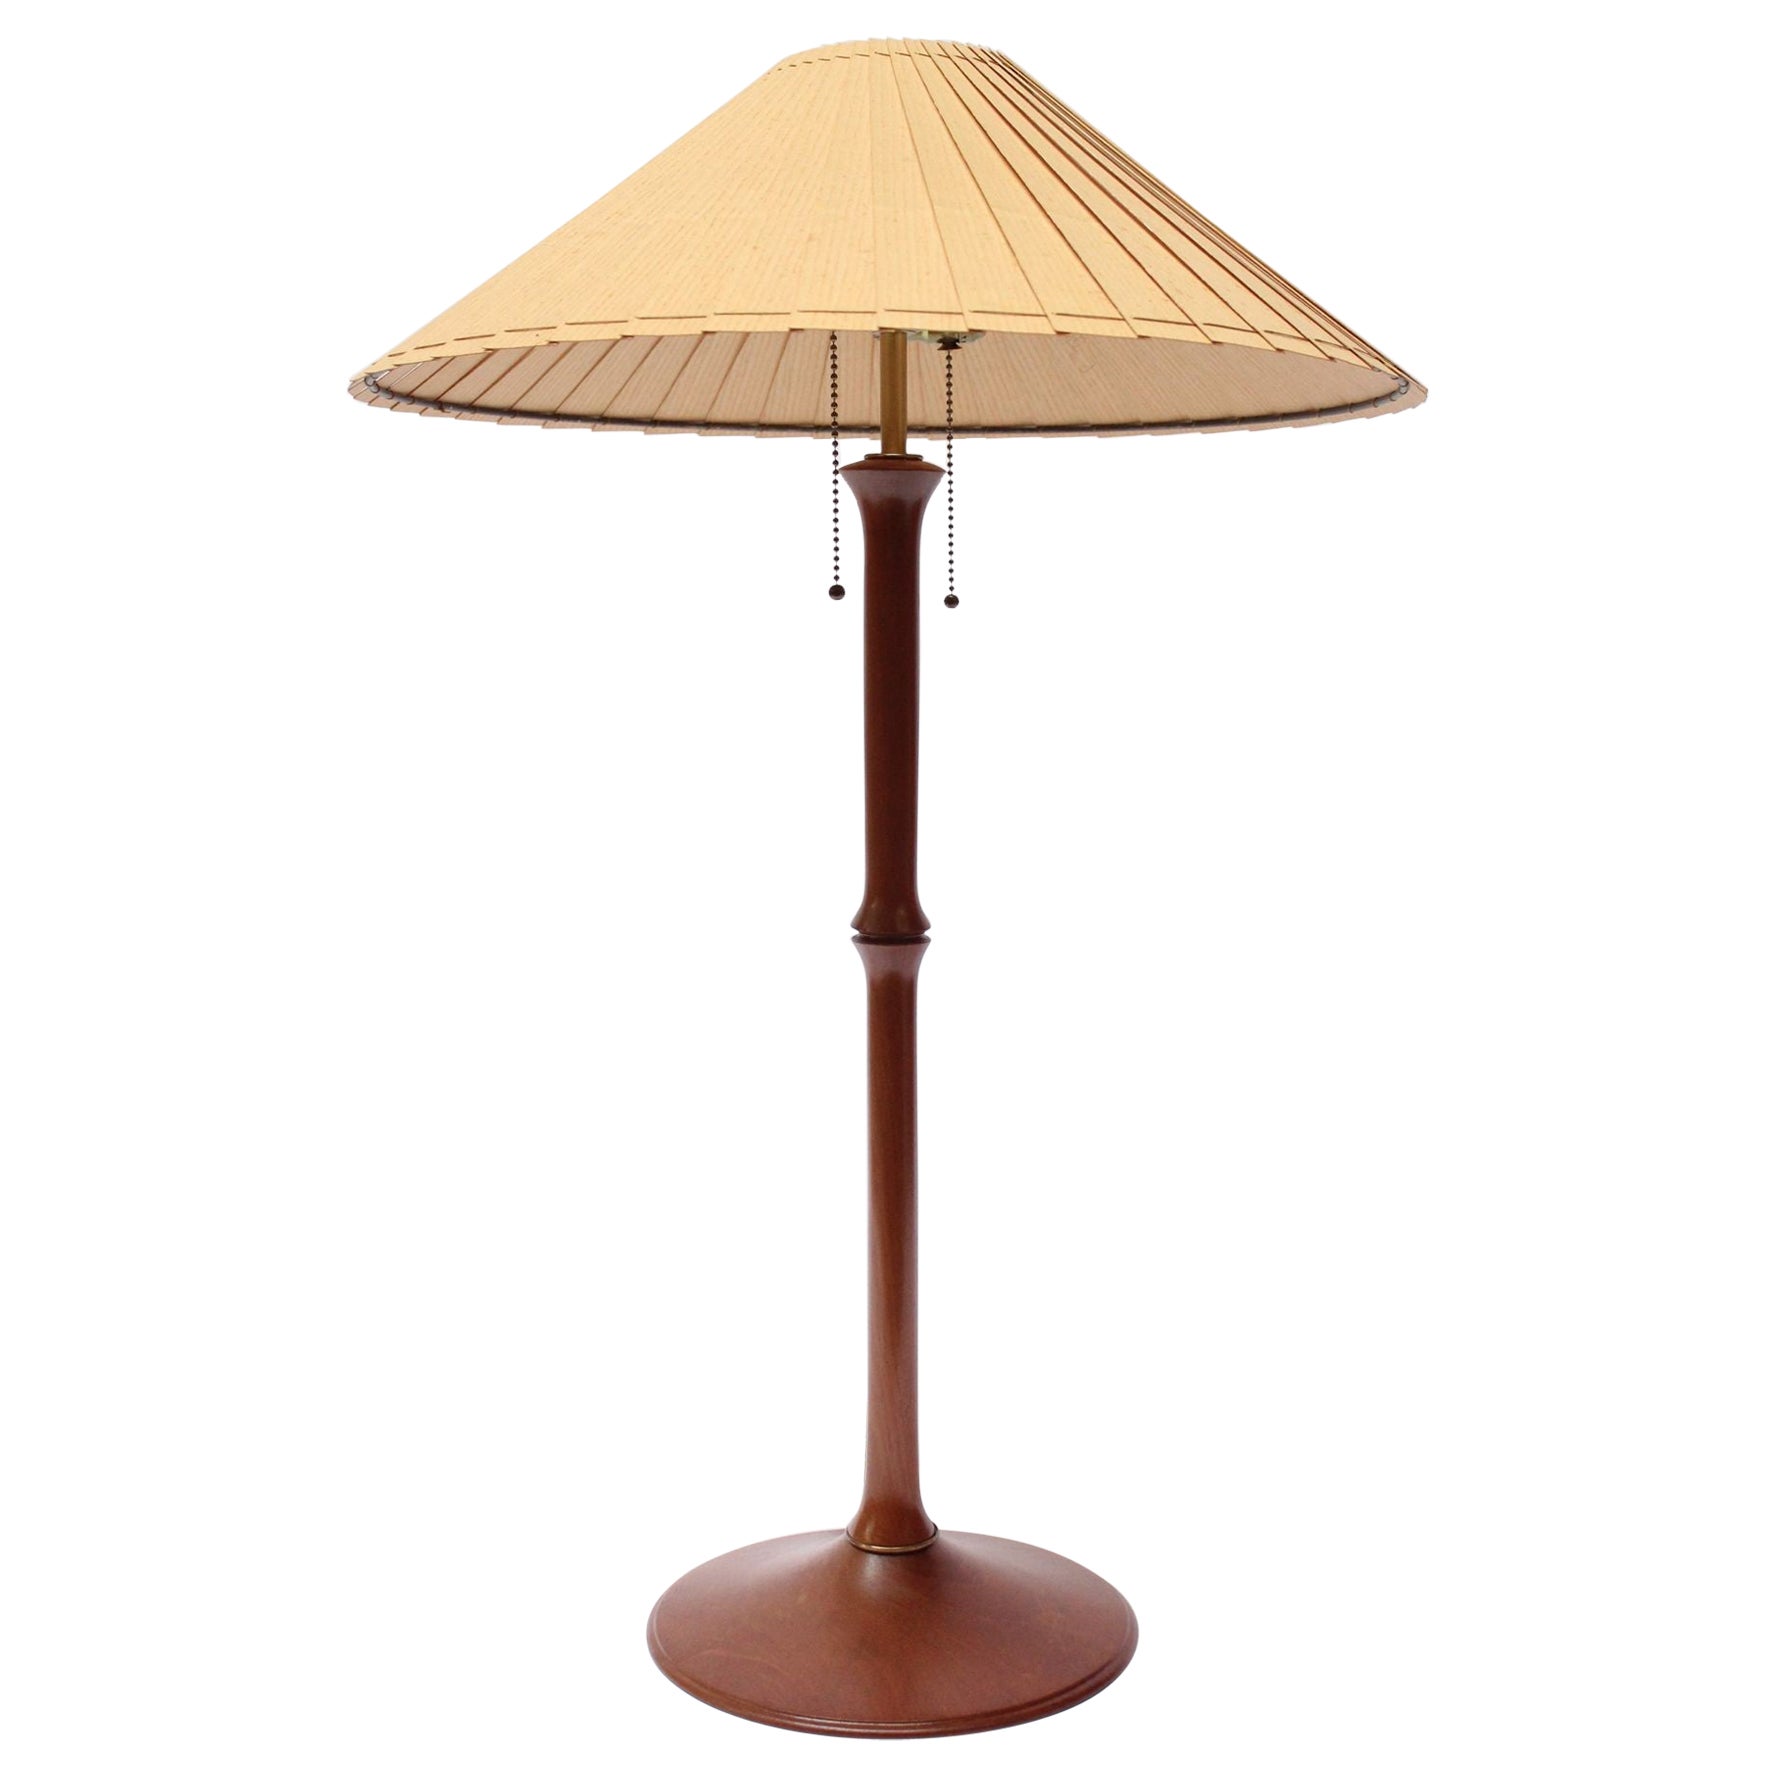 Studio Craft Sculptural Cherry Wood and Brass Table Lamp with Original Shade